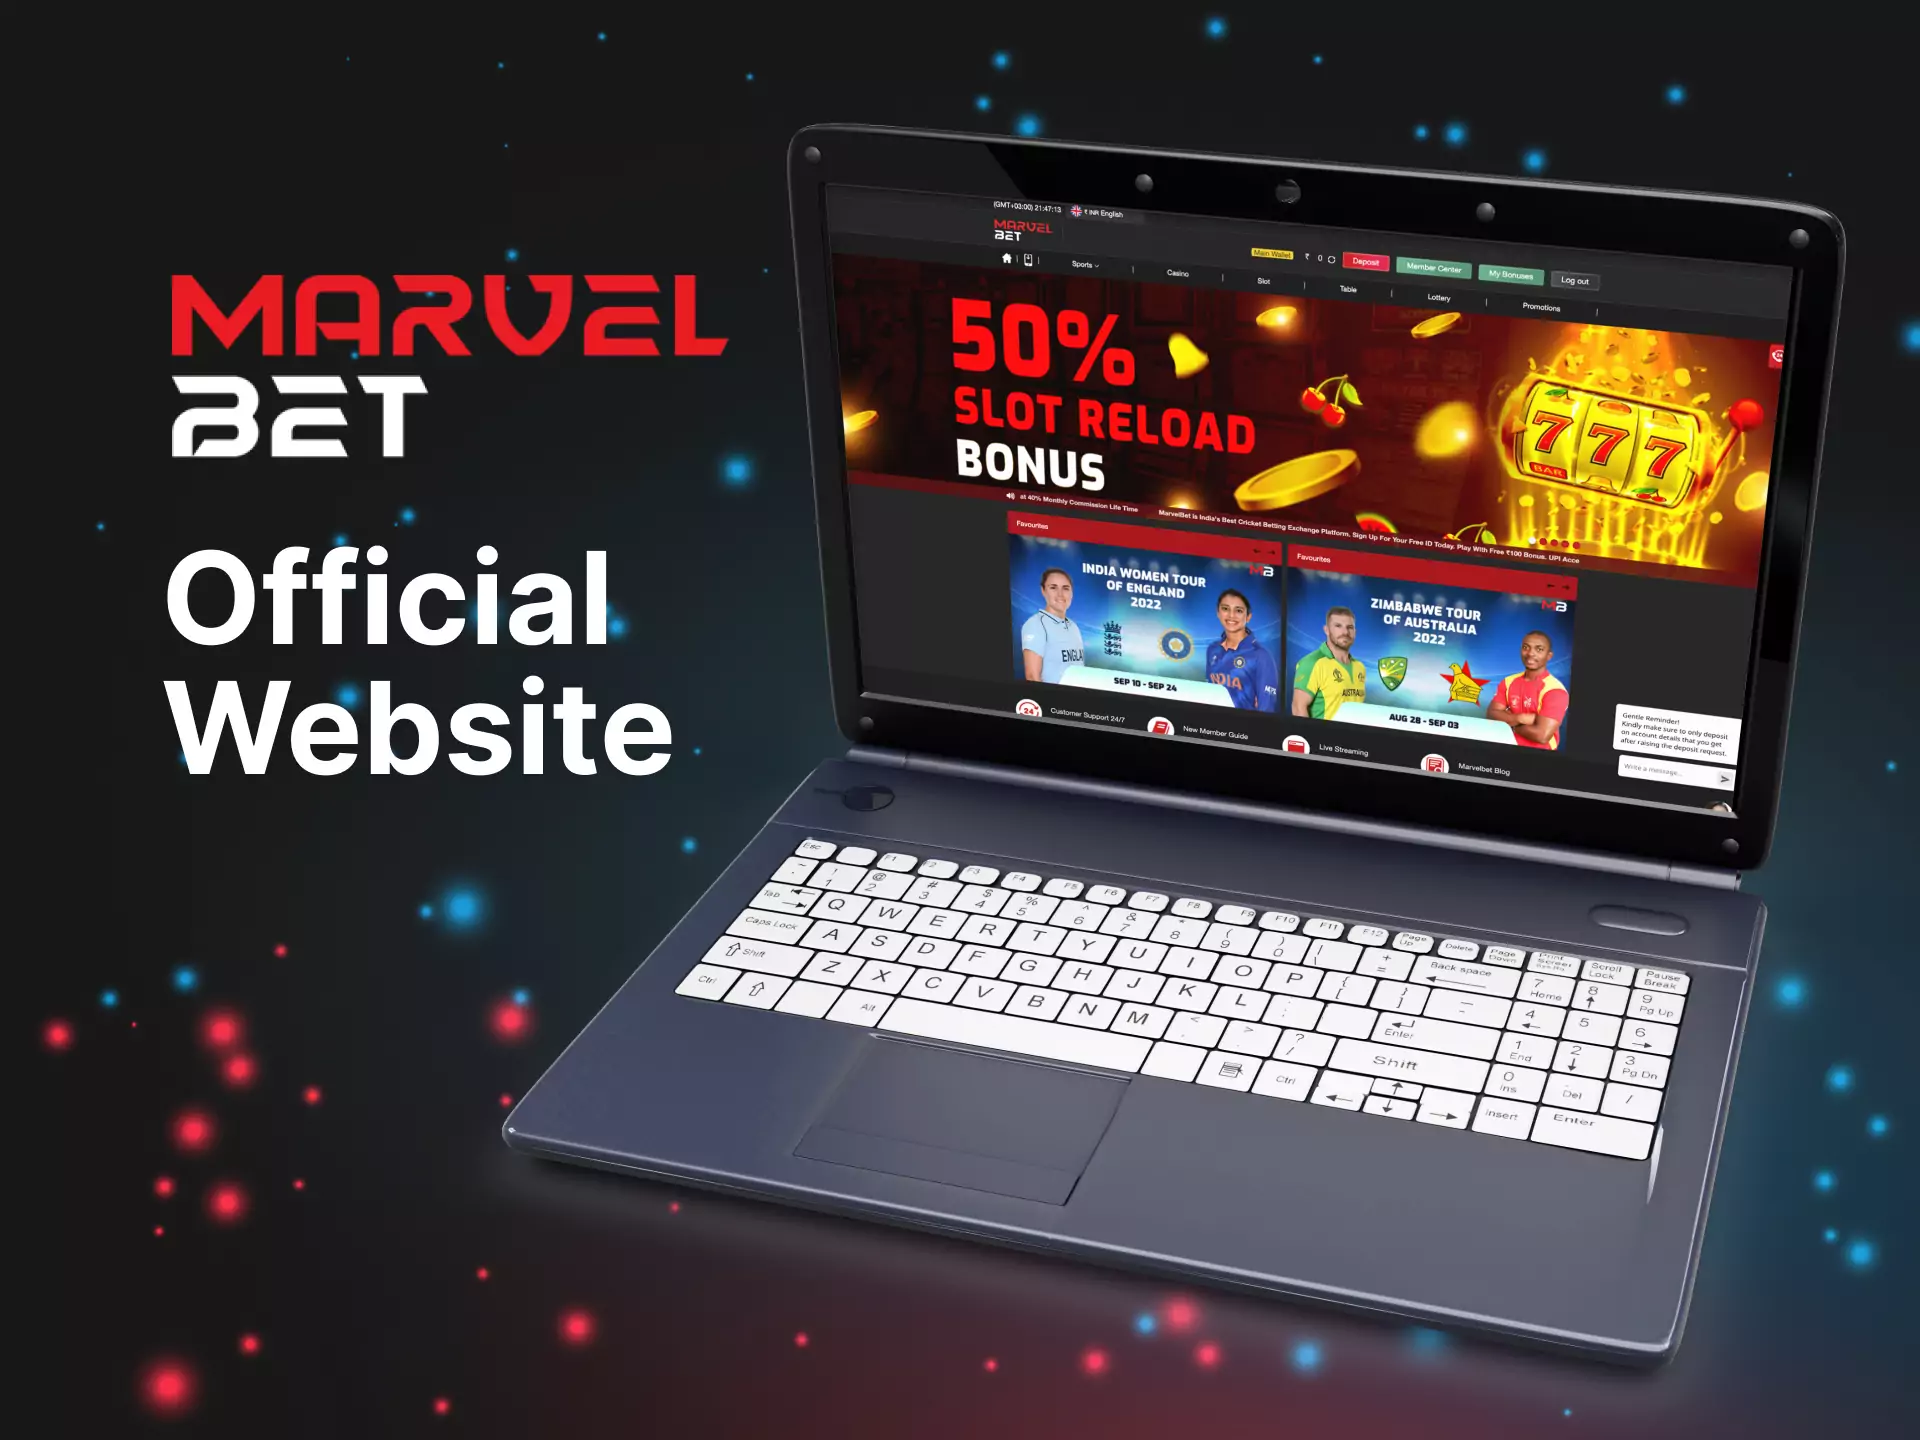 The easiest way to place bets and play casino games on Marvelbet is using the website.